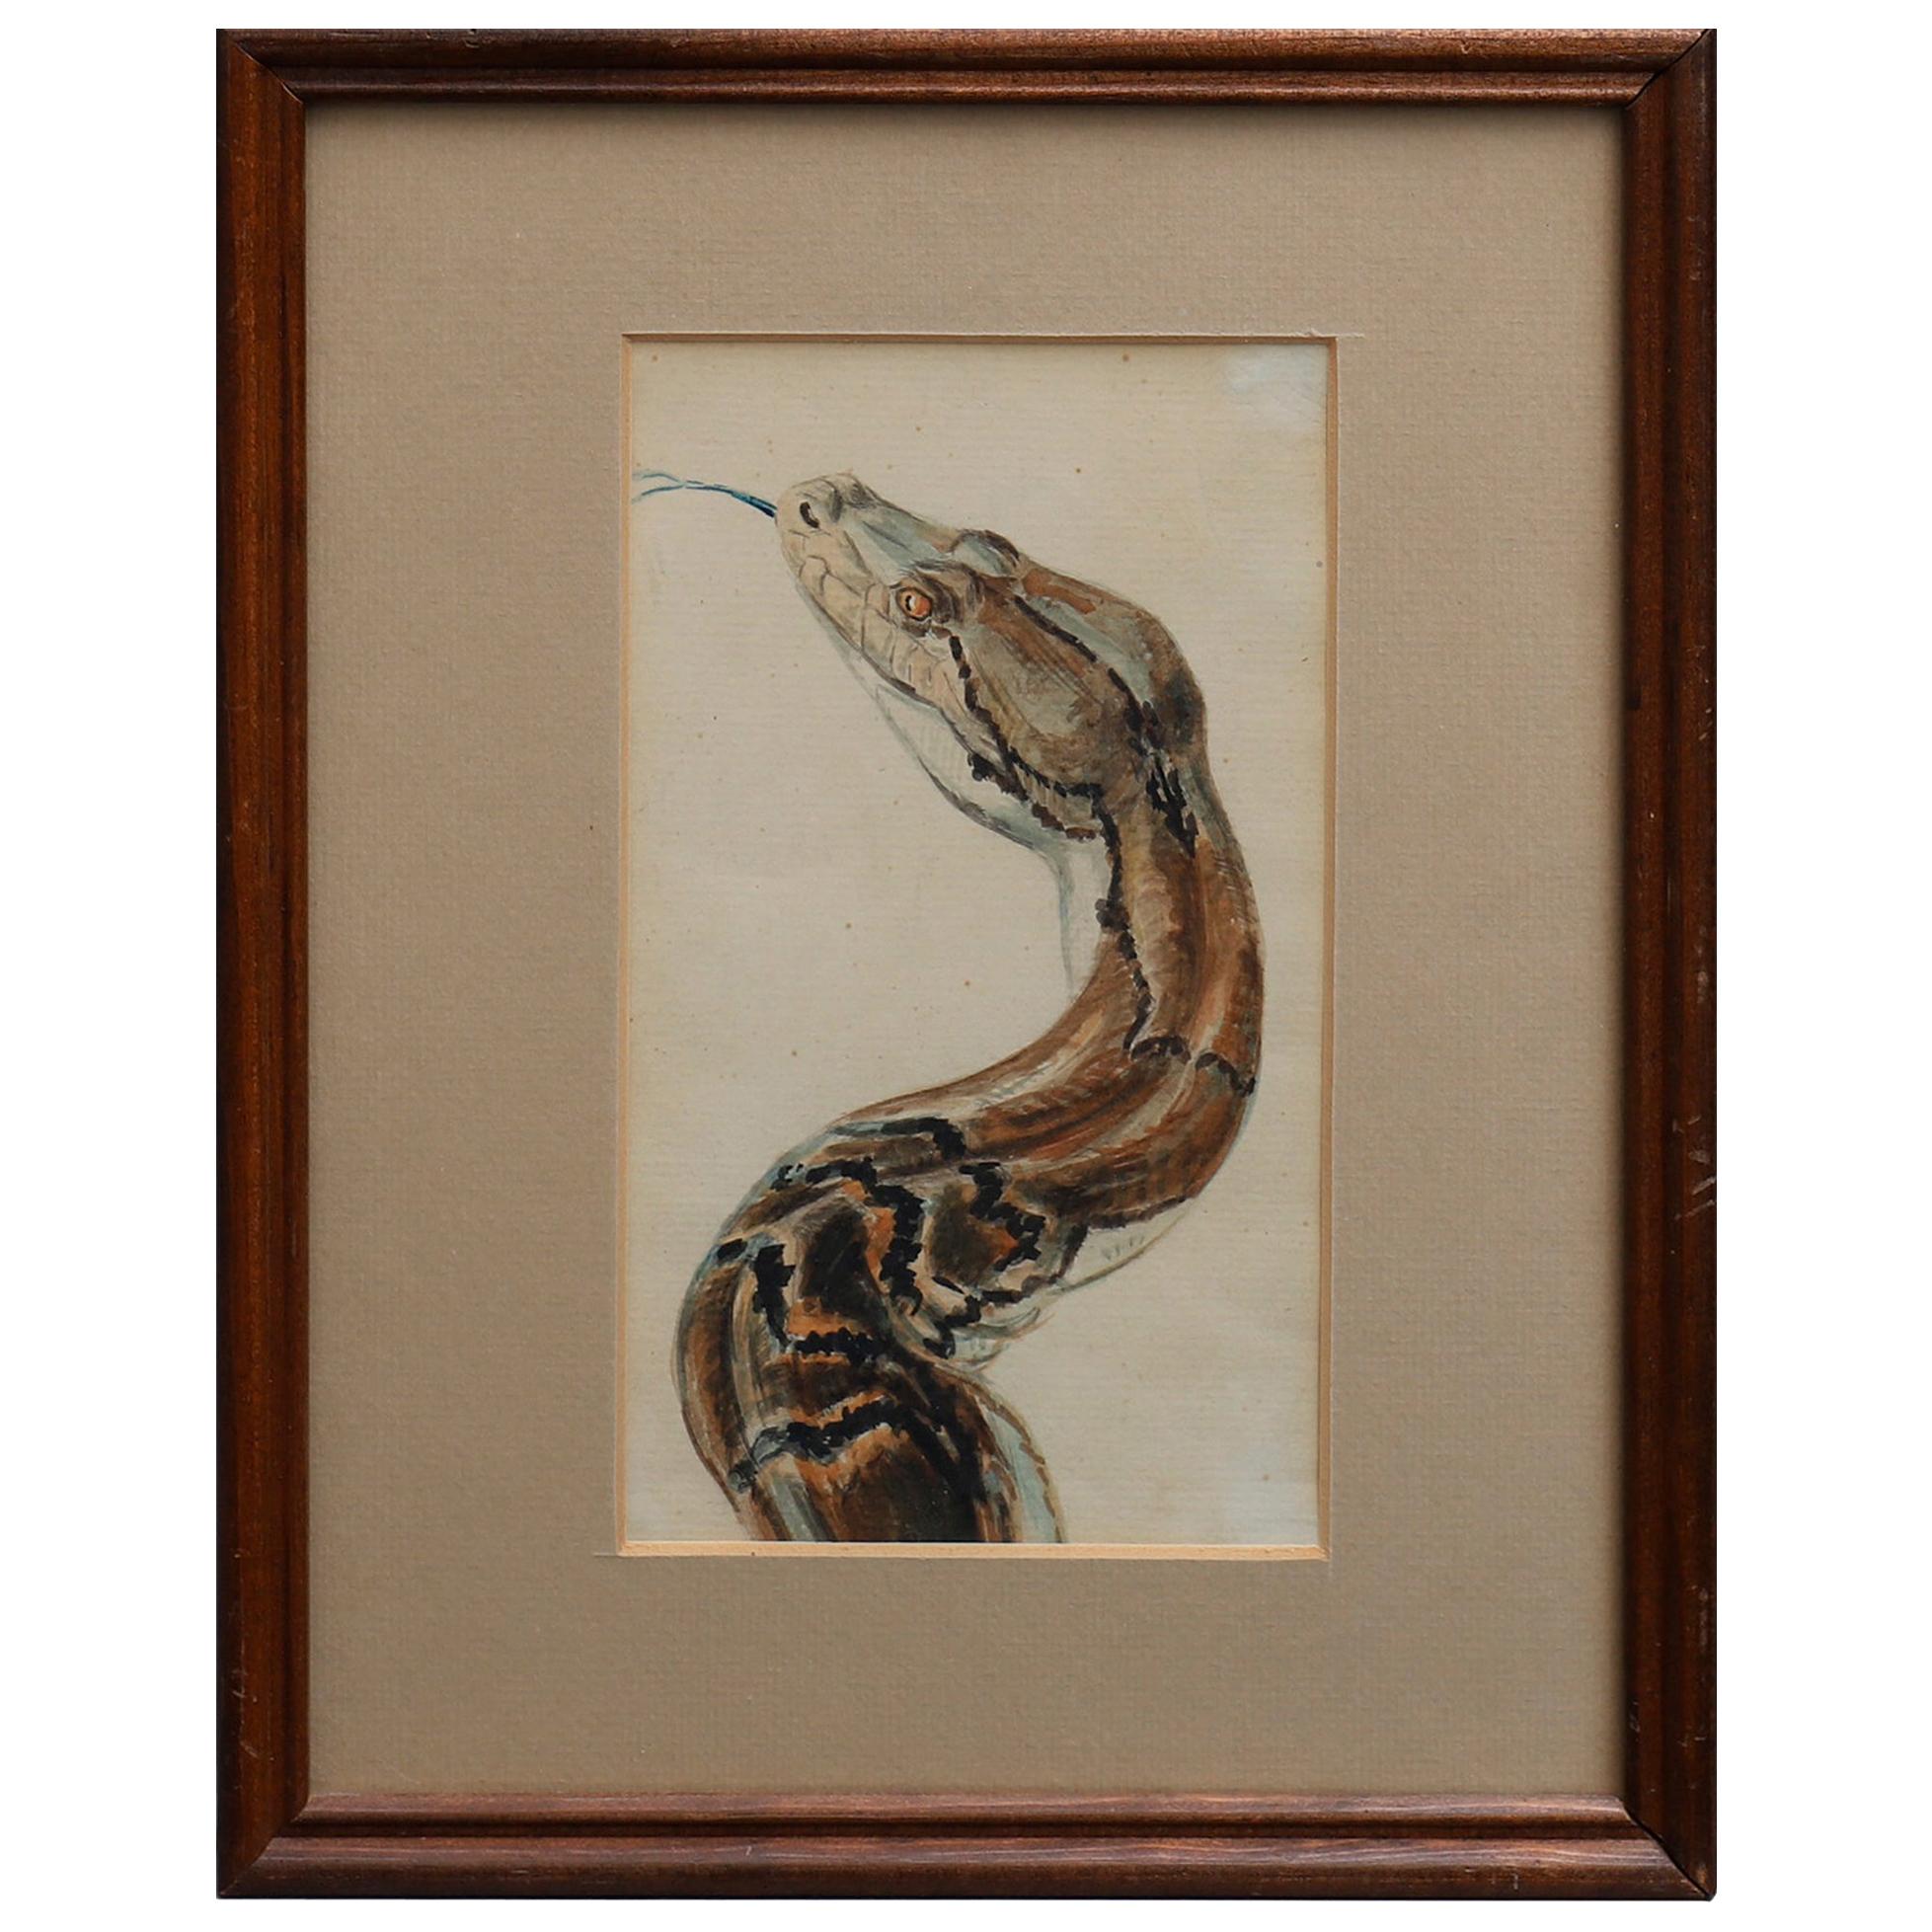 Aquarelle of a Reticulated Python from Copenhagen Zoo Early 1900th Hundred For Sale